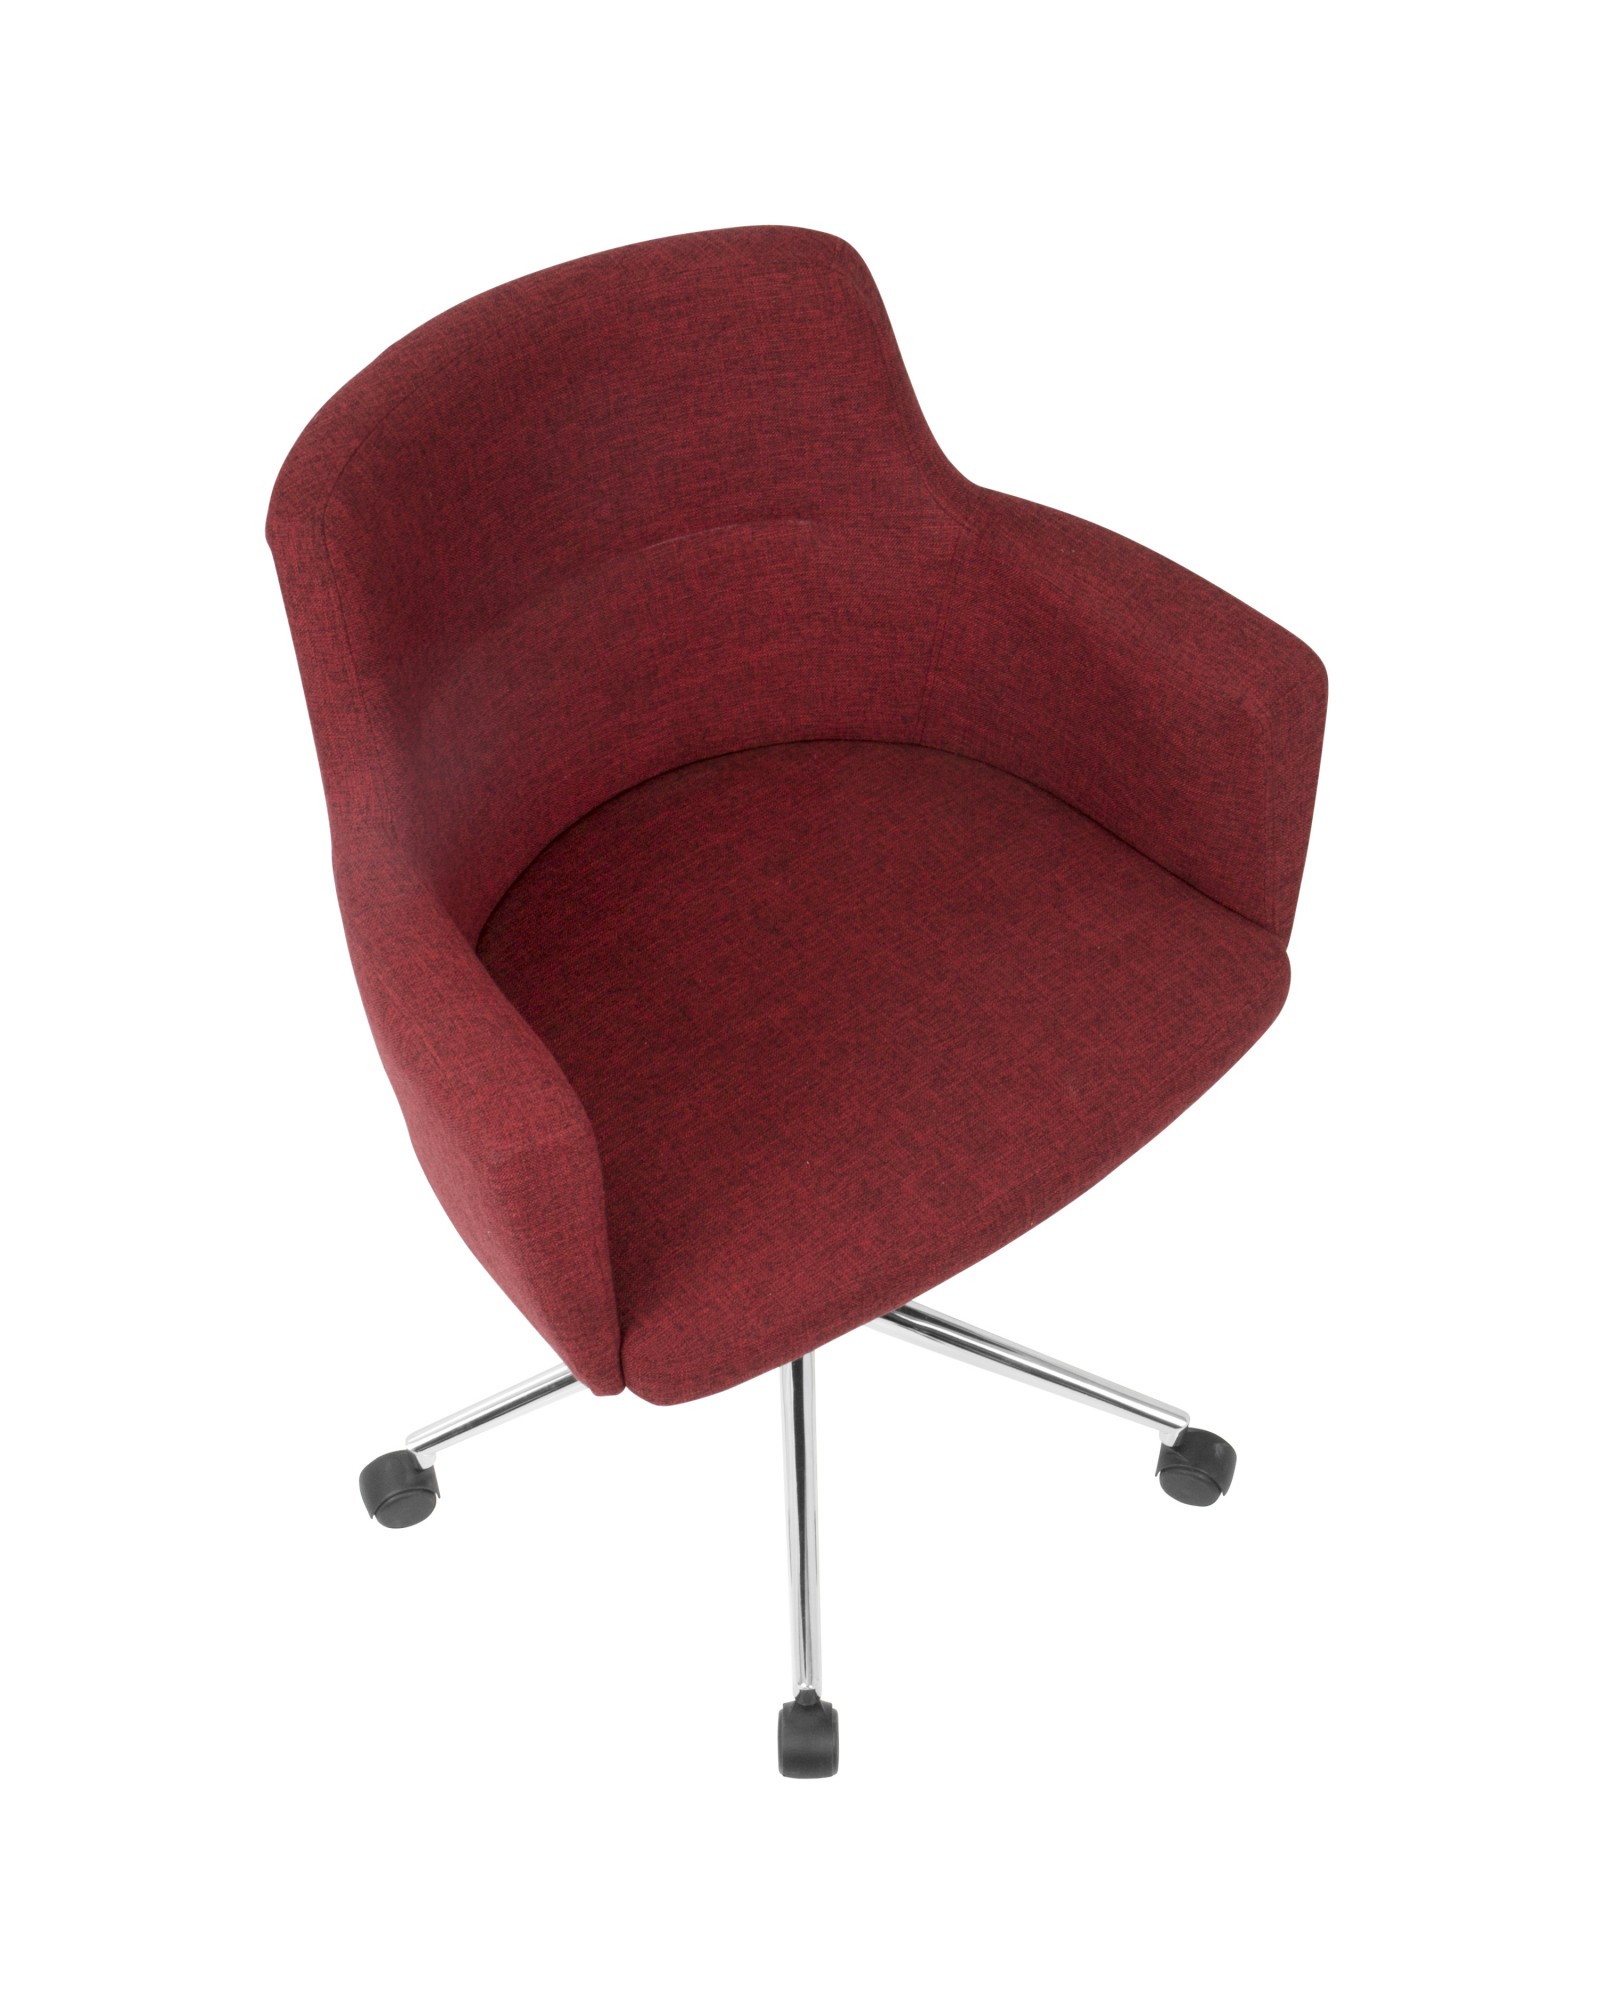 Andrew Contemporary Adjustable Office Chair in Red